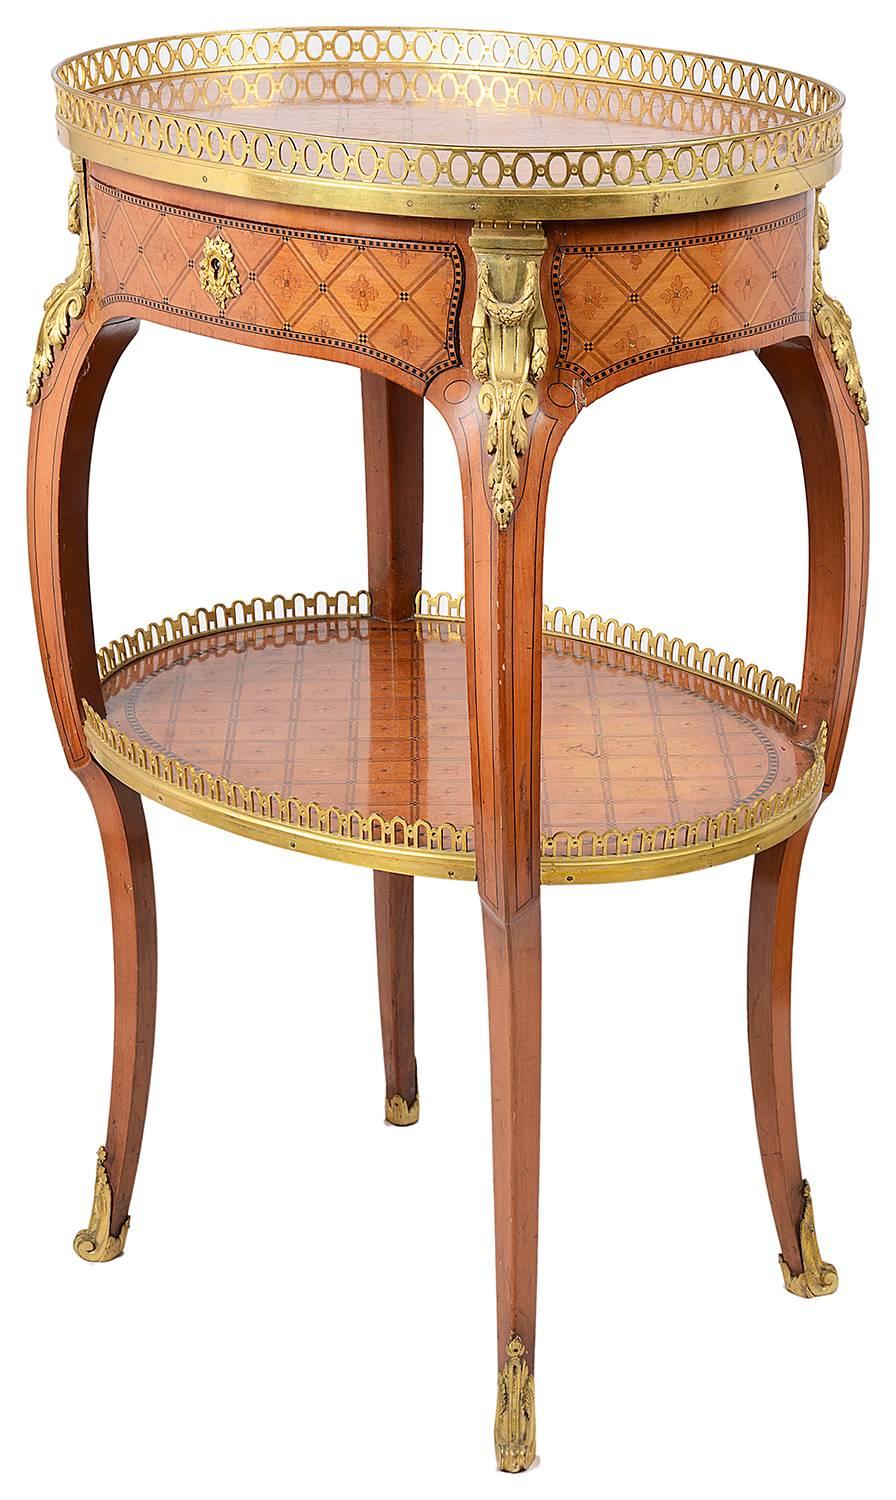 A very good quality late 19th century Louis XVI style Donald Ross two-tier side table, having fine marquetry inlay to the top, a brass gallery. A single frieze drawer, raised on cabriole legs with inlaid, galleried under tier.